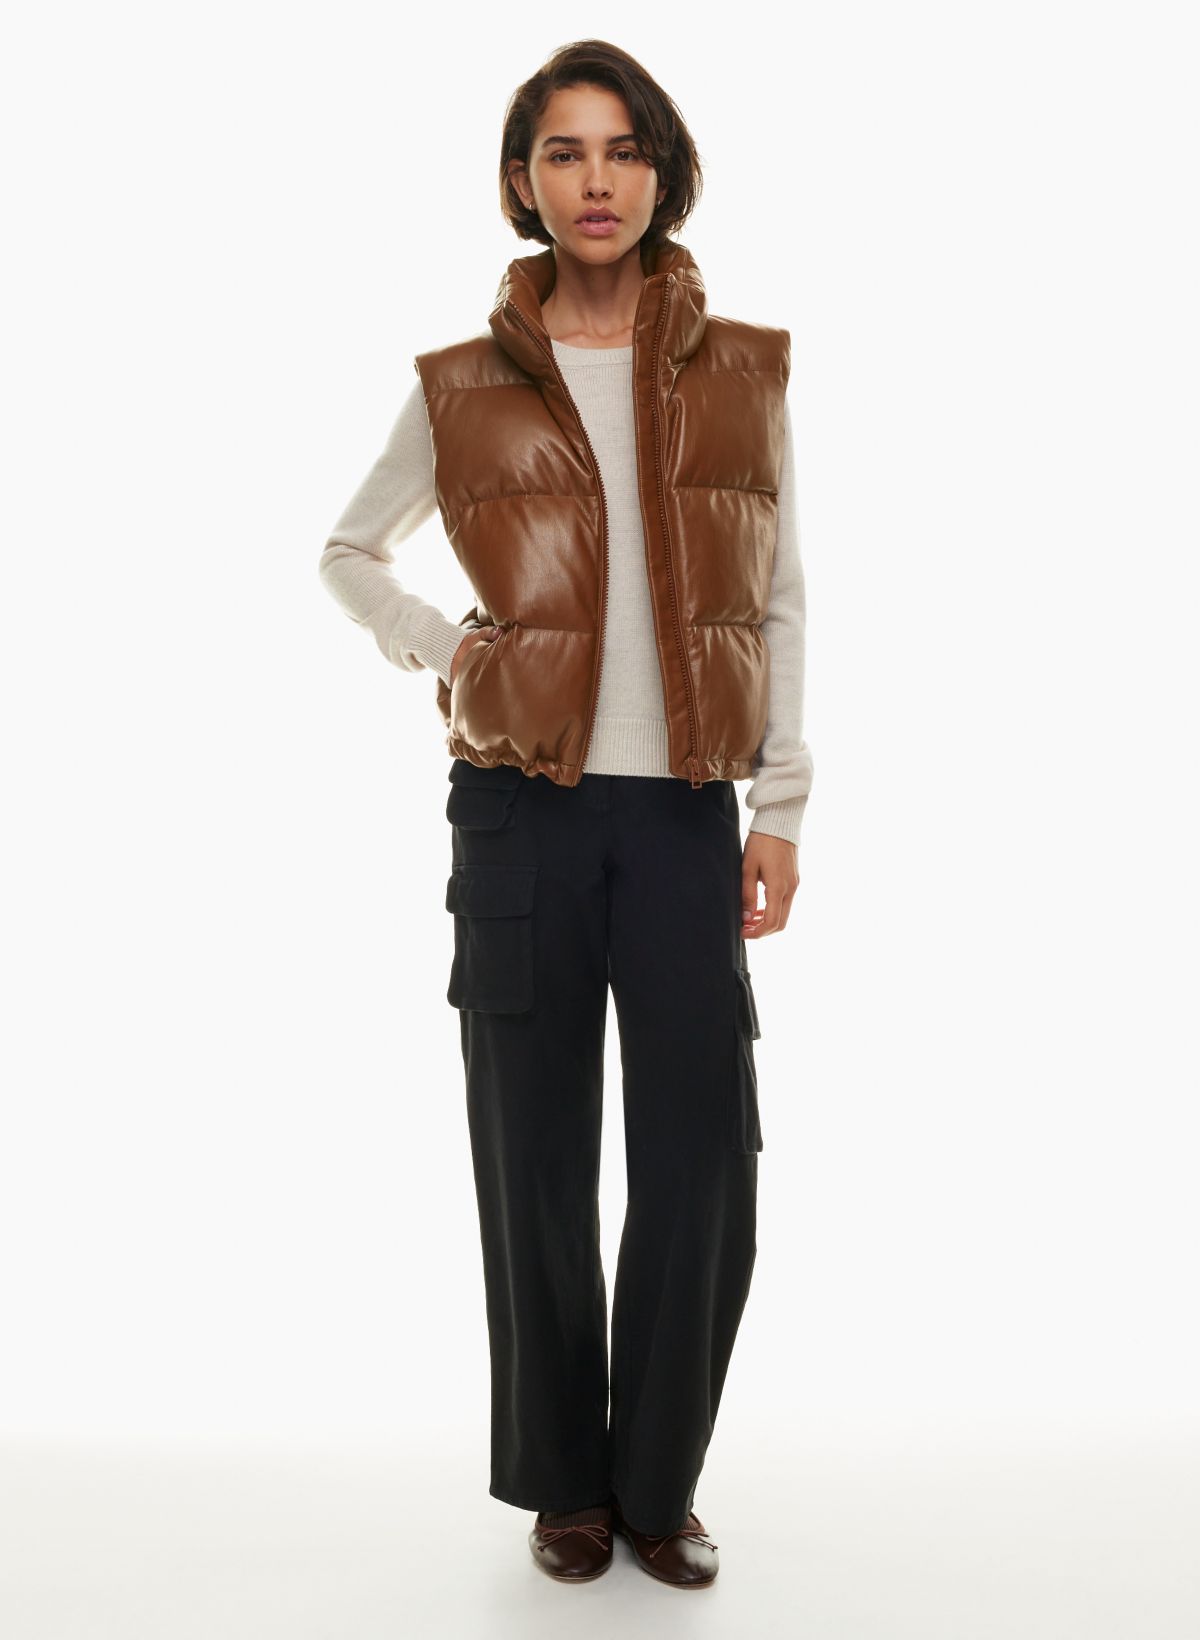 Genuine leather puffer jackets down leather jacket leather coat Chloe